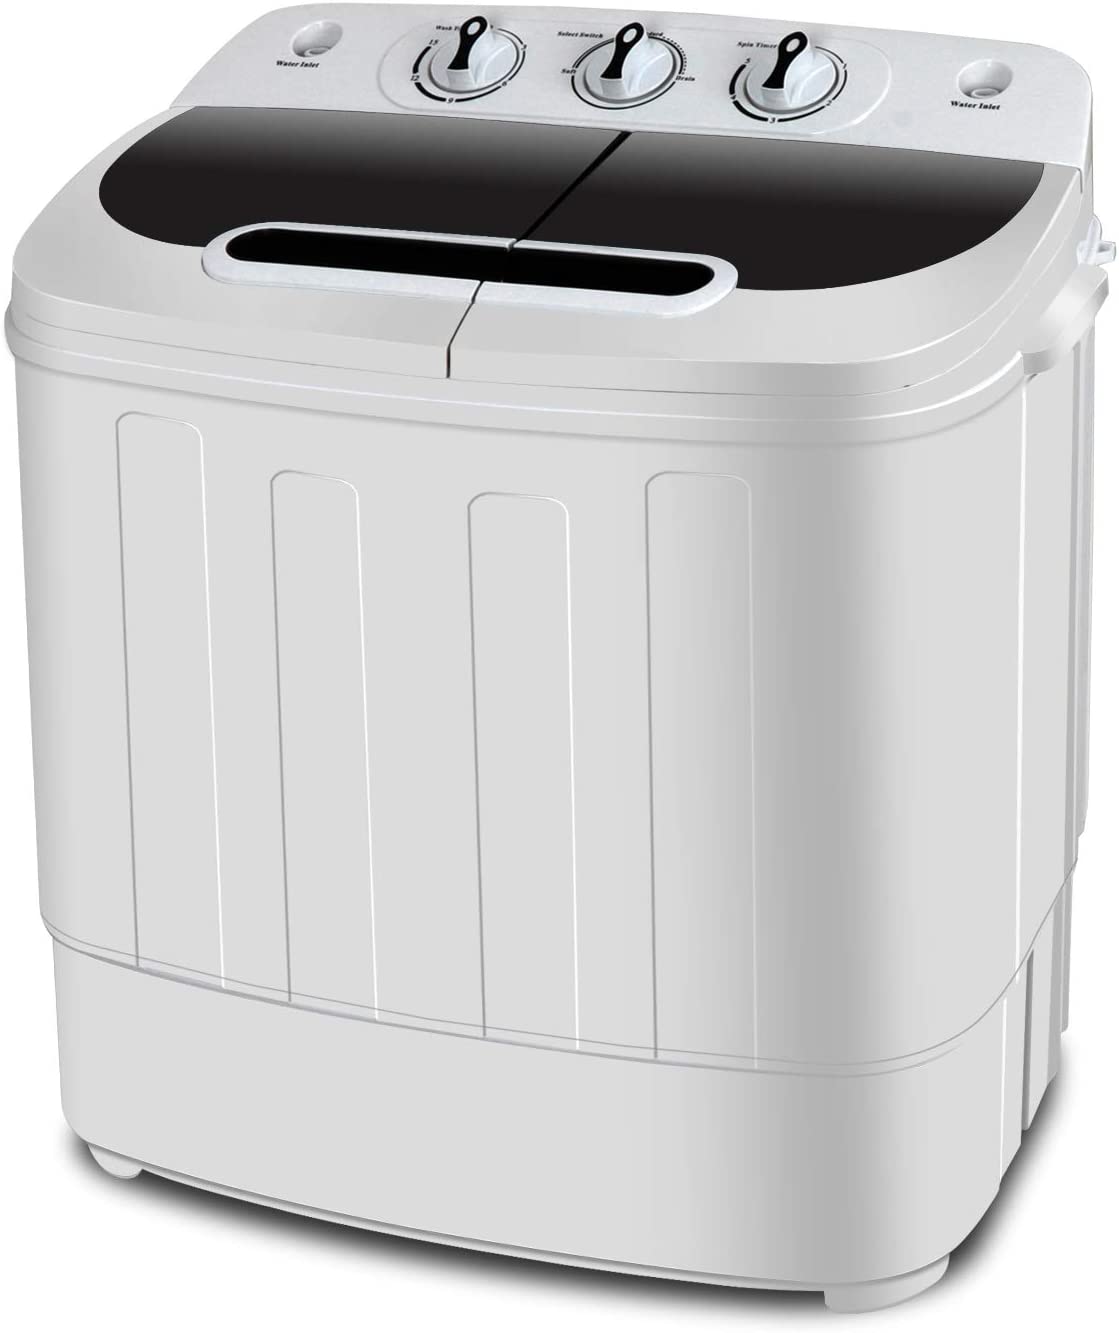 SUPER DEAL Compact Mini Twin Tub Washing Machine, Portable Laundry Washer w/ Wash and Spin Cycle Combo, Built-in Gravity Drain, 13lbs Capacity for  Camping, Apartments, Dorms, College Rooms, RV's and more